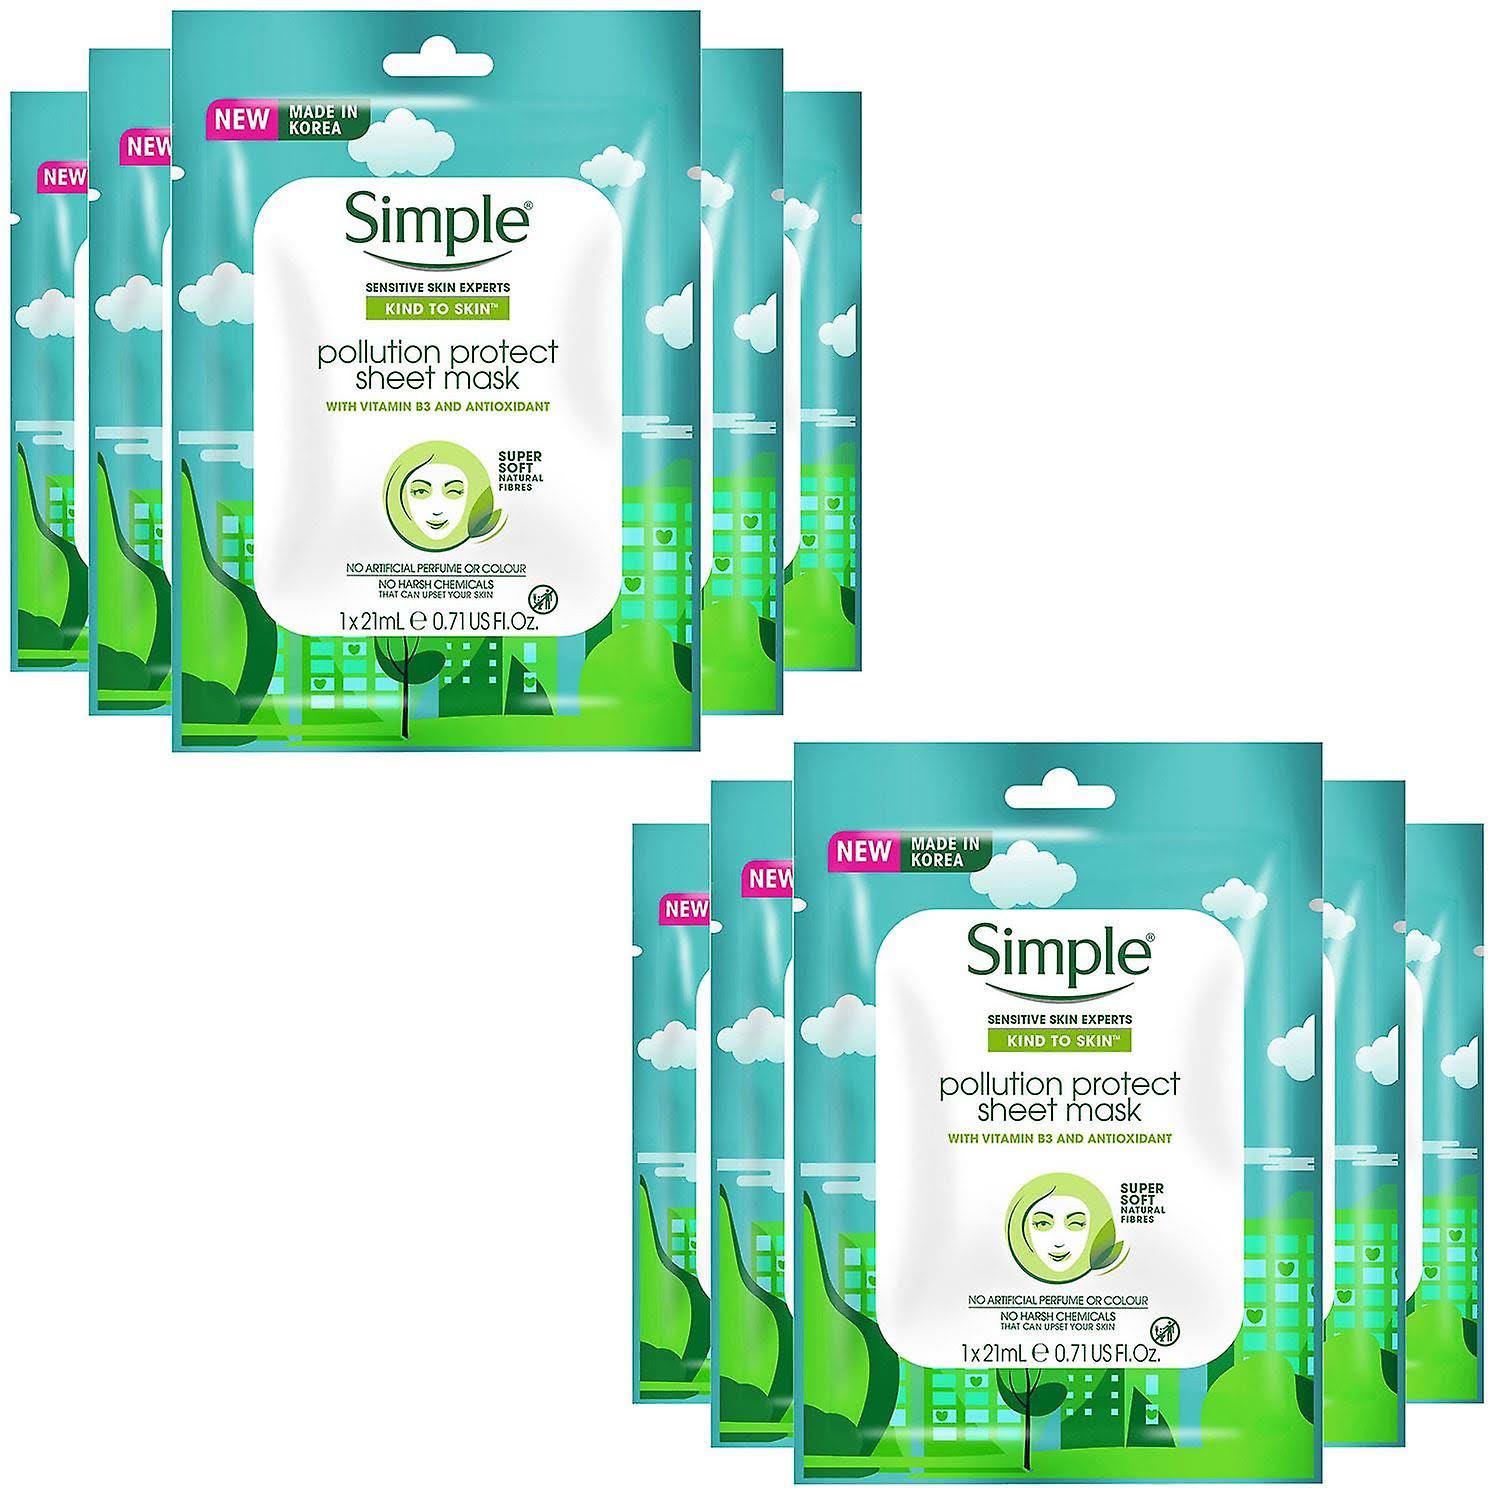 Simple Kind to Skin Pollution Protect Sheet Mask